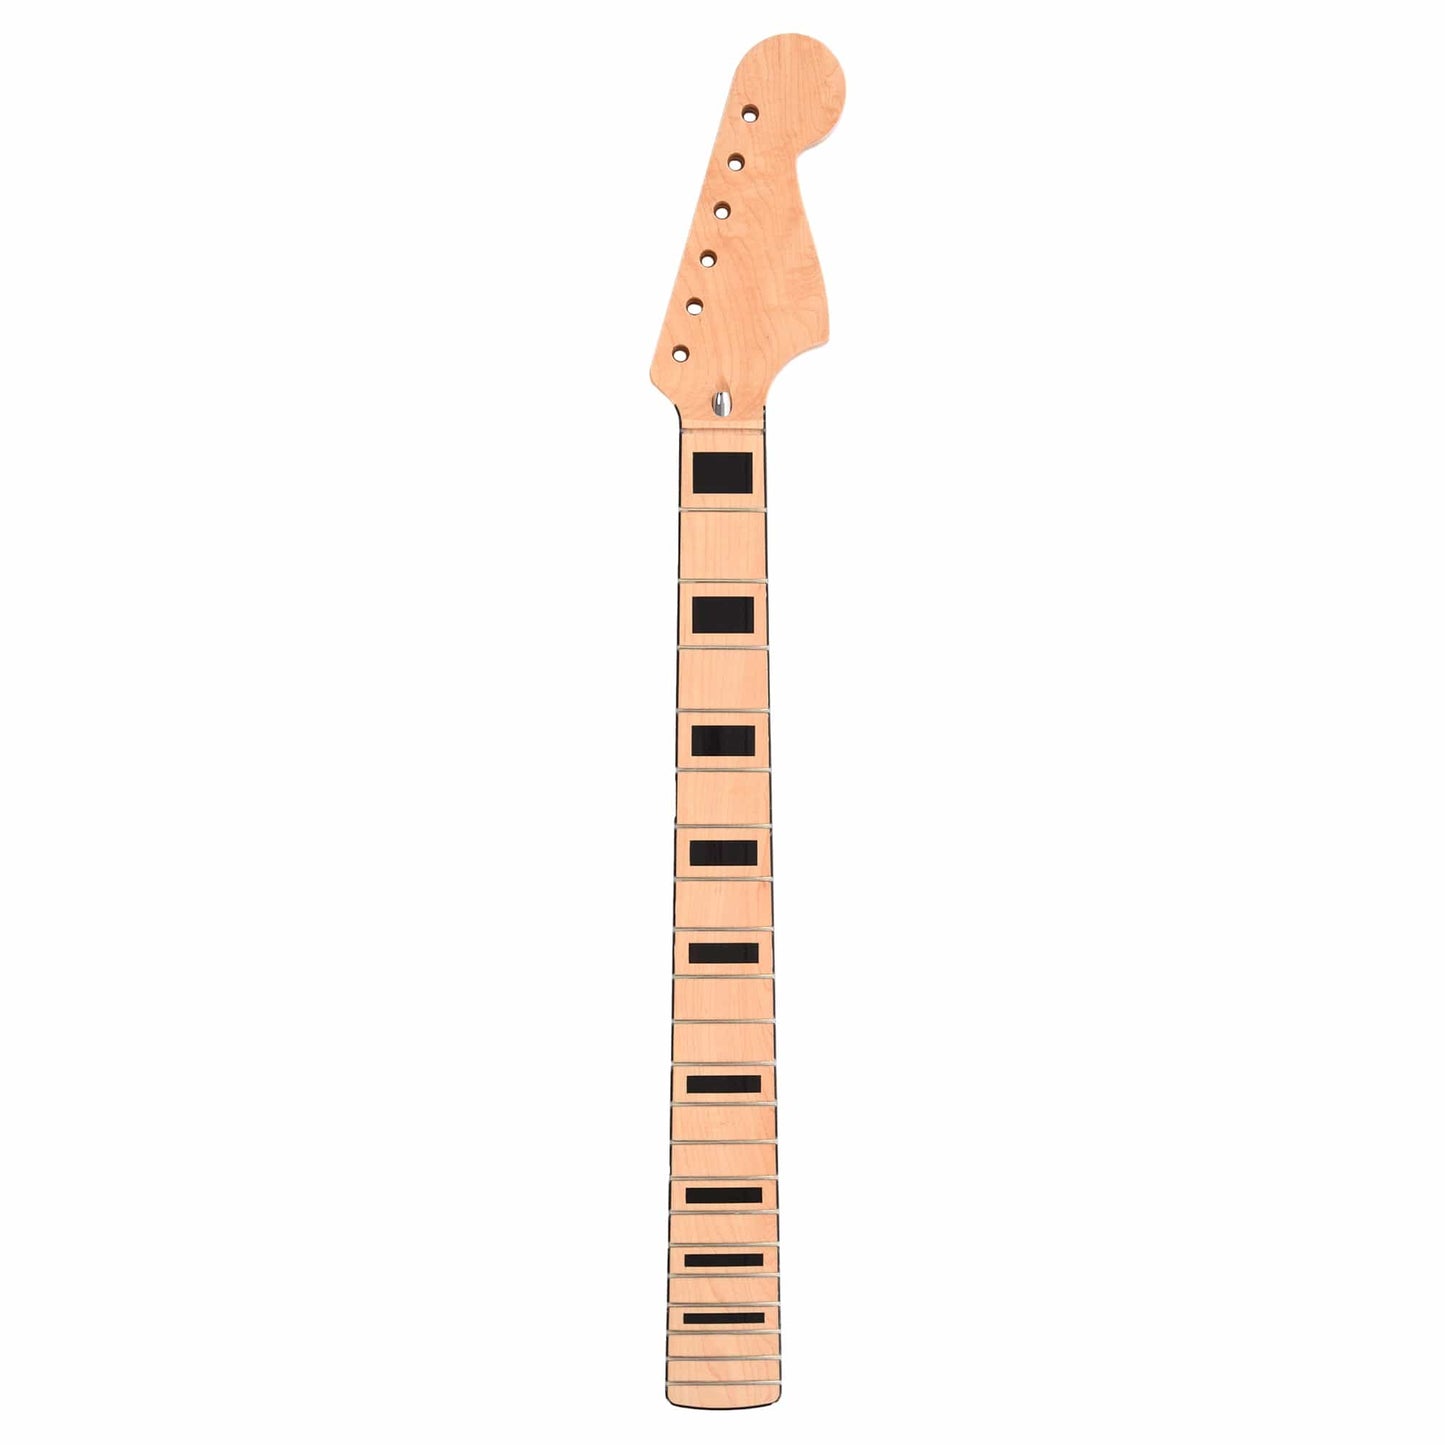 Allparts Replacement Neck For Jazzmaster/Stratocaster Natural w/Black Binding & Block Inlays Parts / Amp Parts